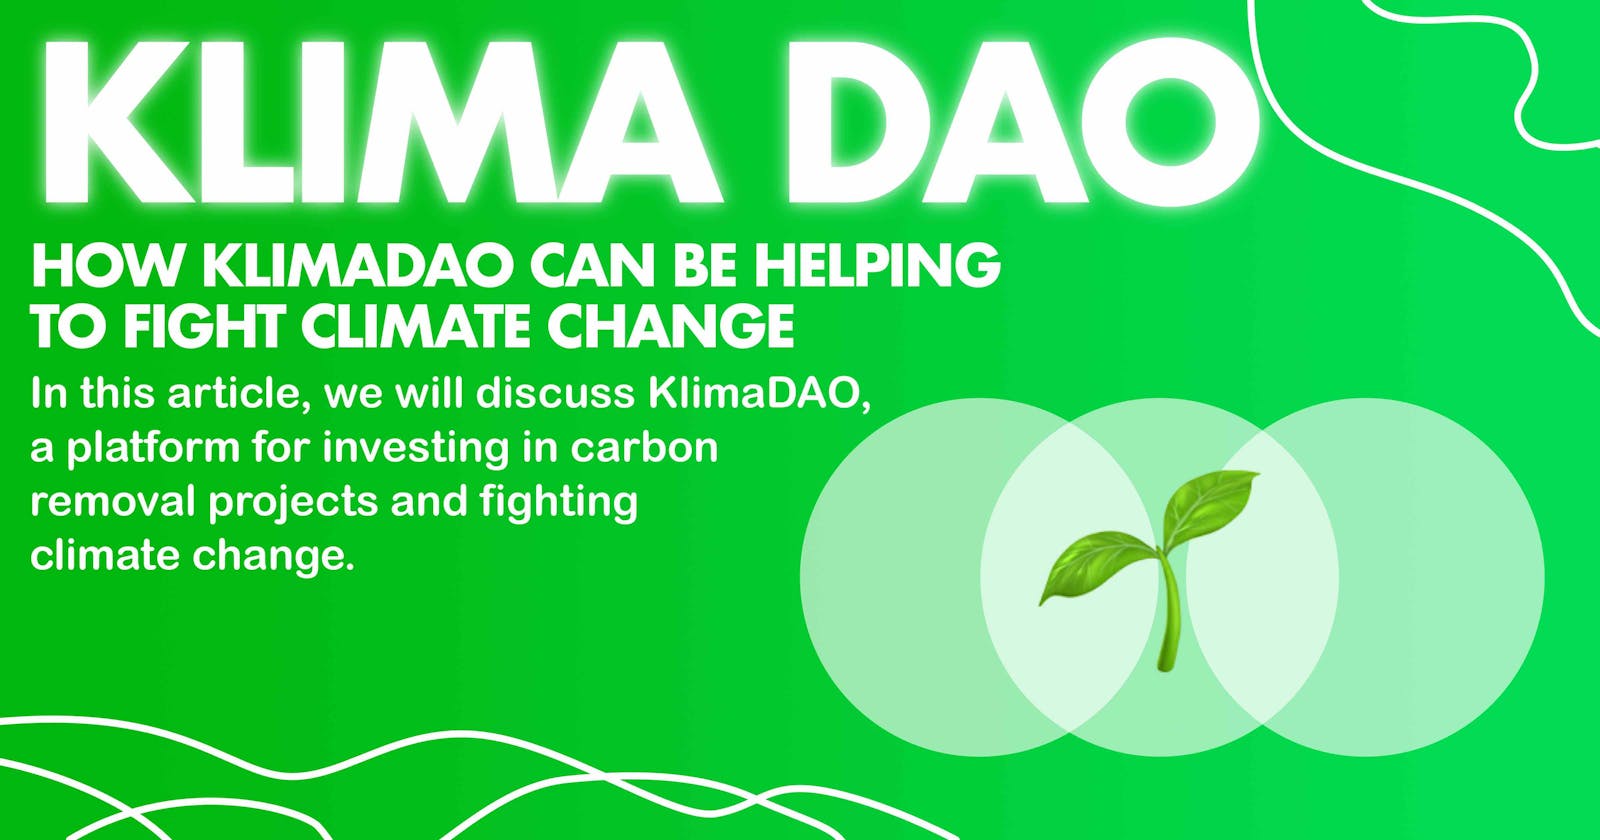 How KlimaDAO can be helping to fight climate change